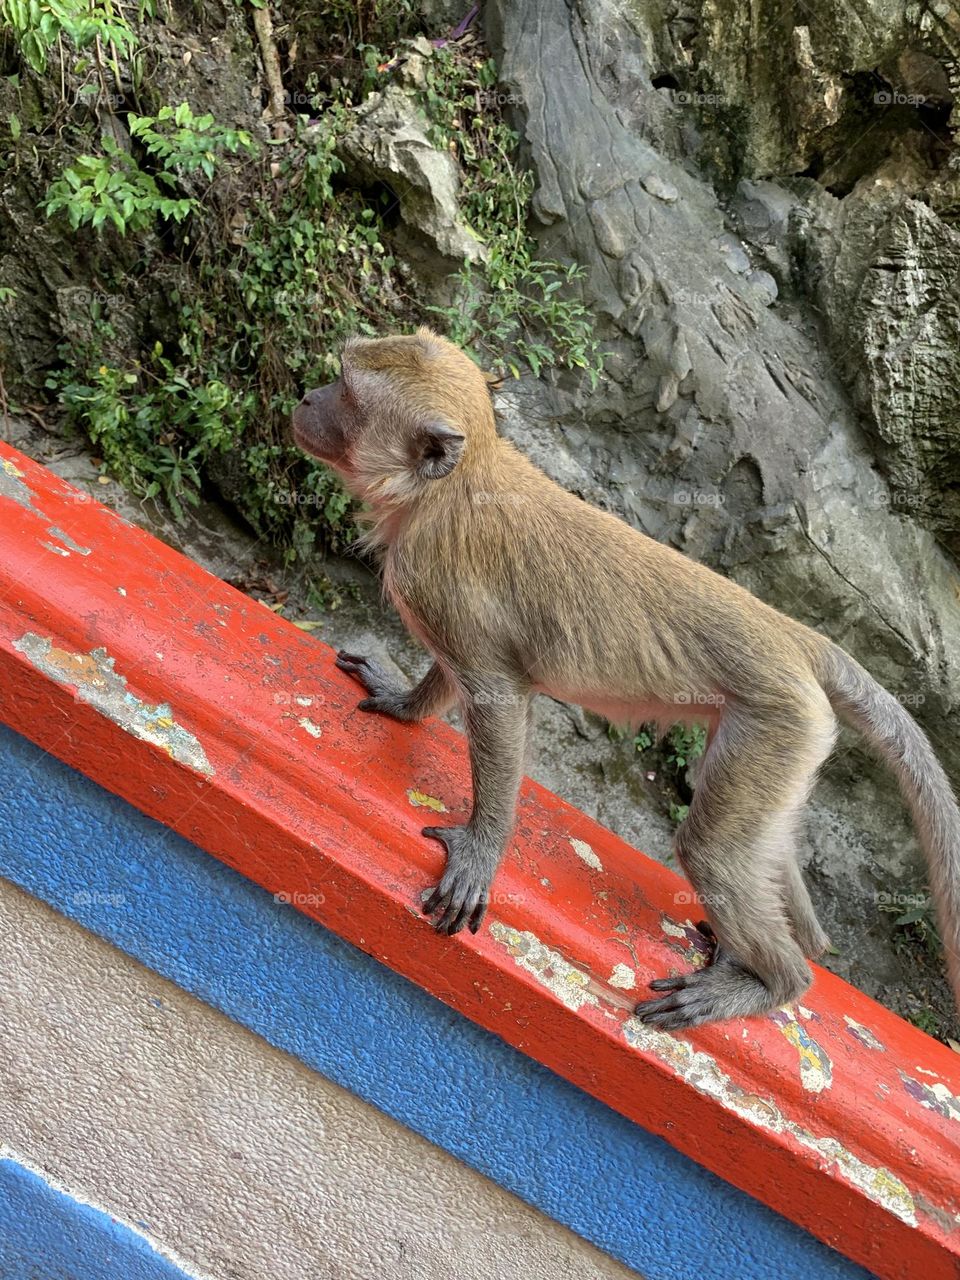 Monkey spotted in Malaysia